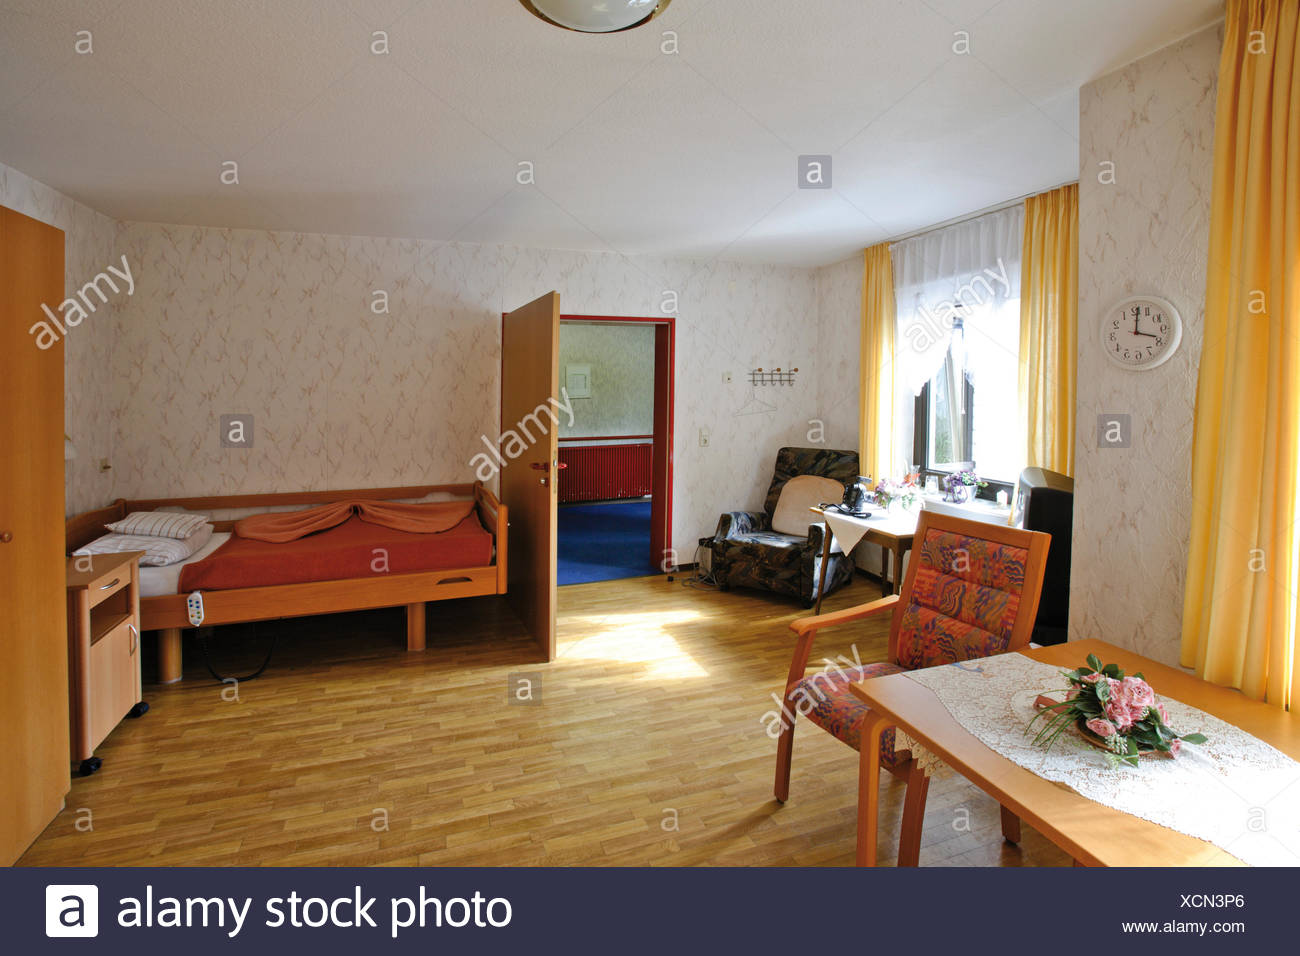 Room In An Old Age Home Nursing Home Stock Photo 283205726 Alamy